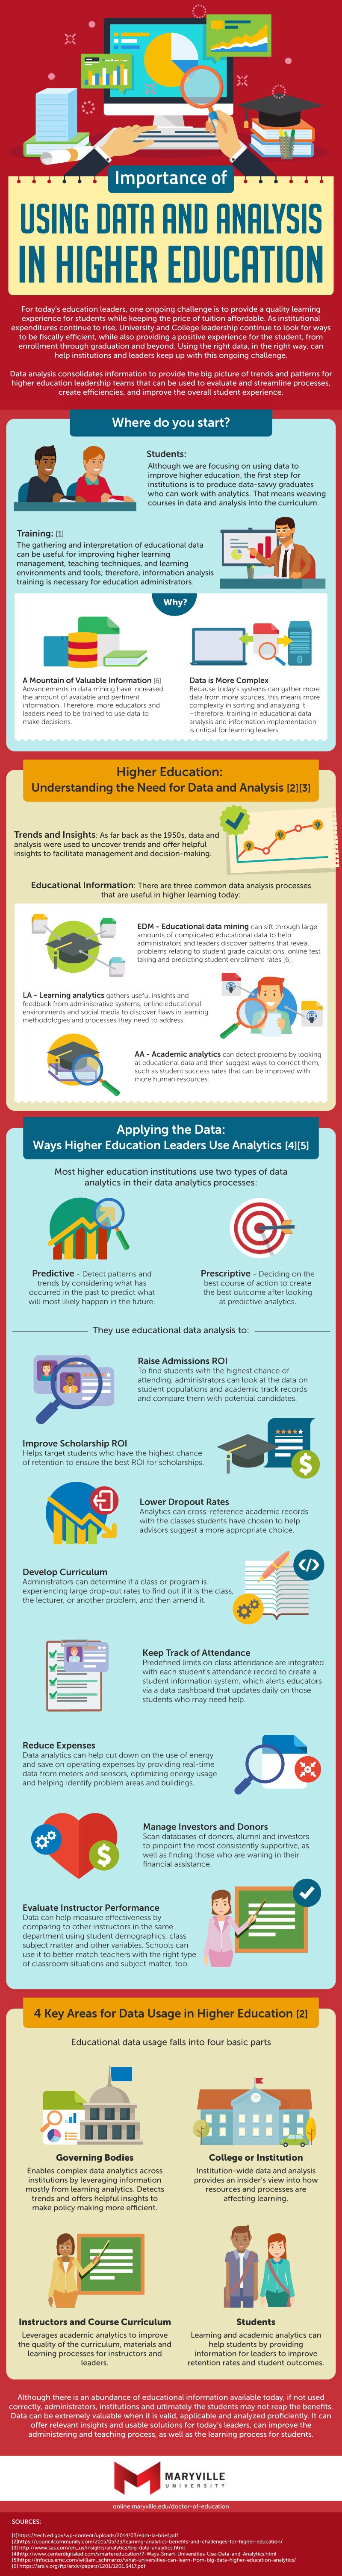 Using Data and Analysis in Higher Education Infographic